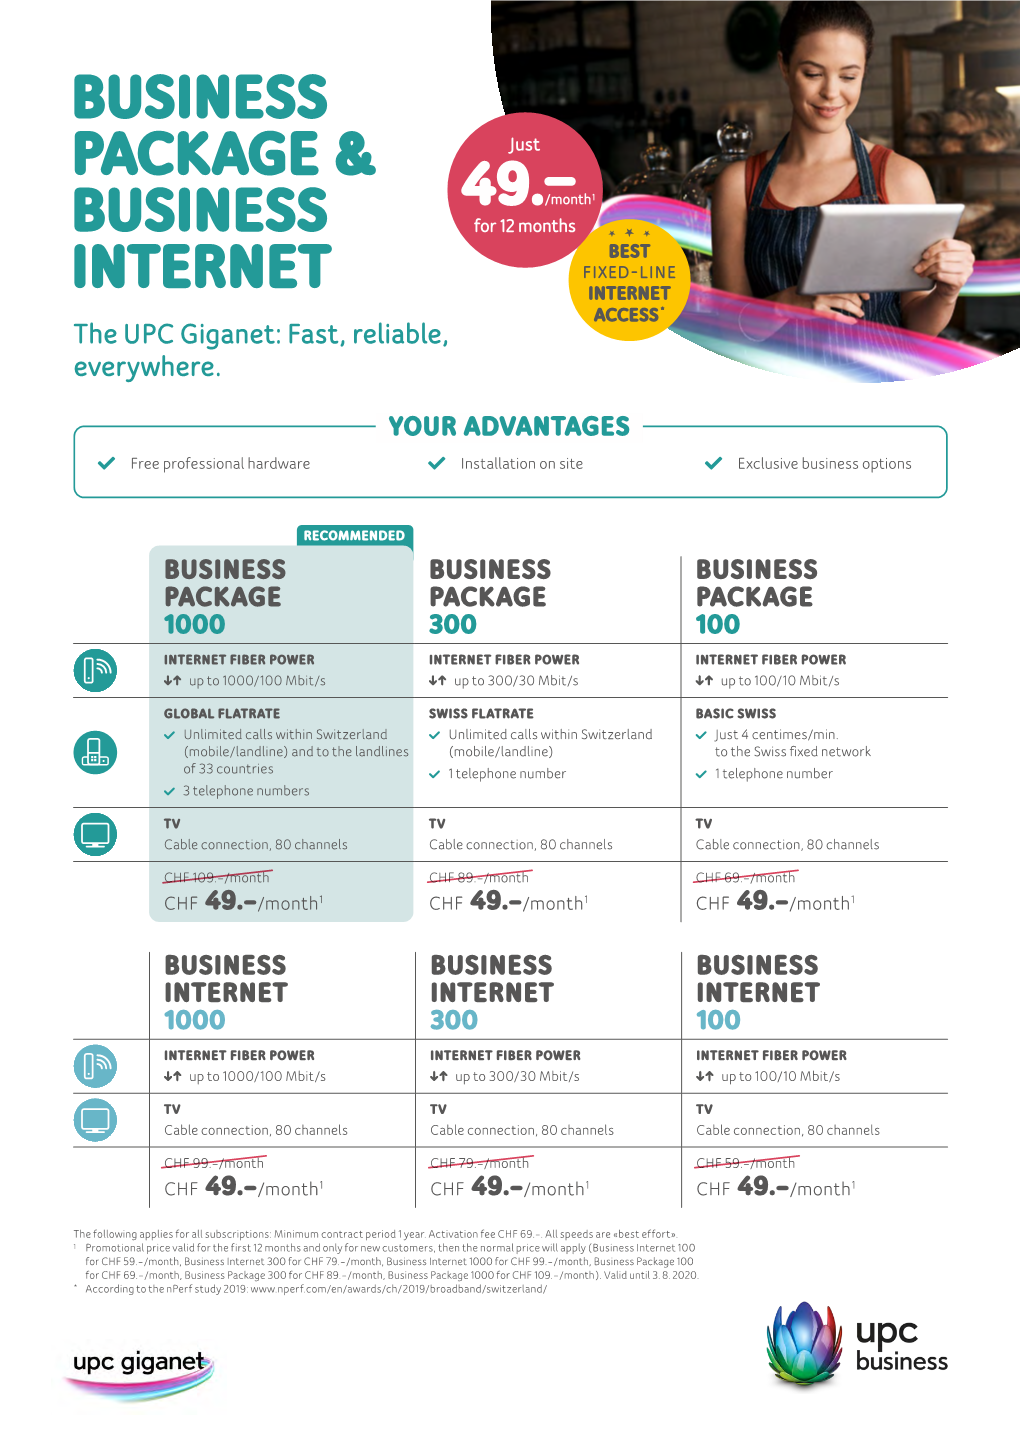 BUSINESS PACKAGE & BUSINESS INTERNET 49.—/Month1